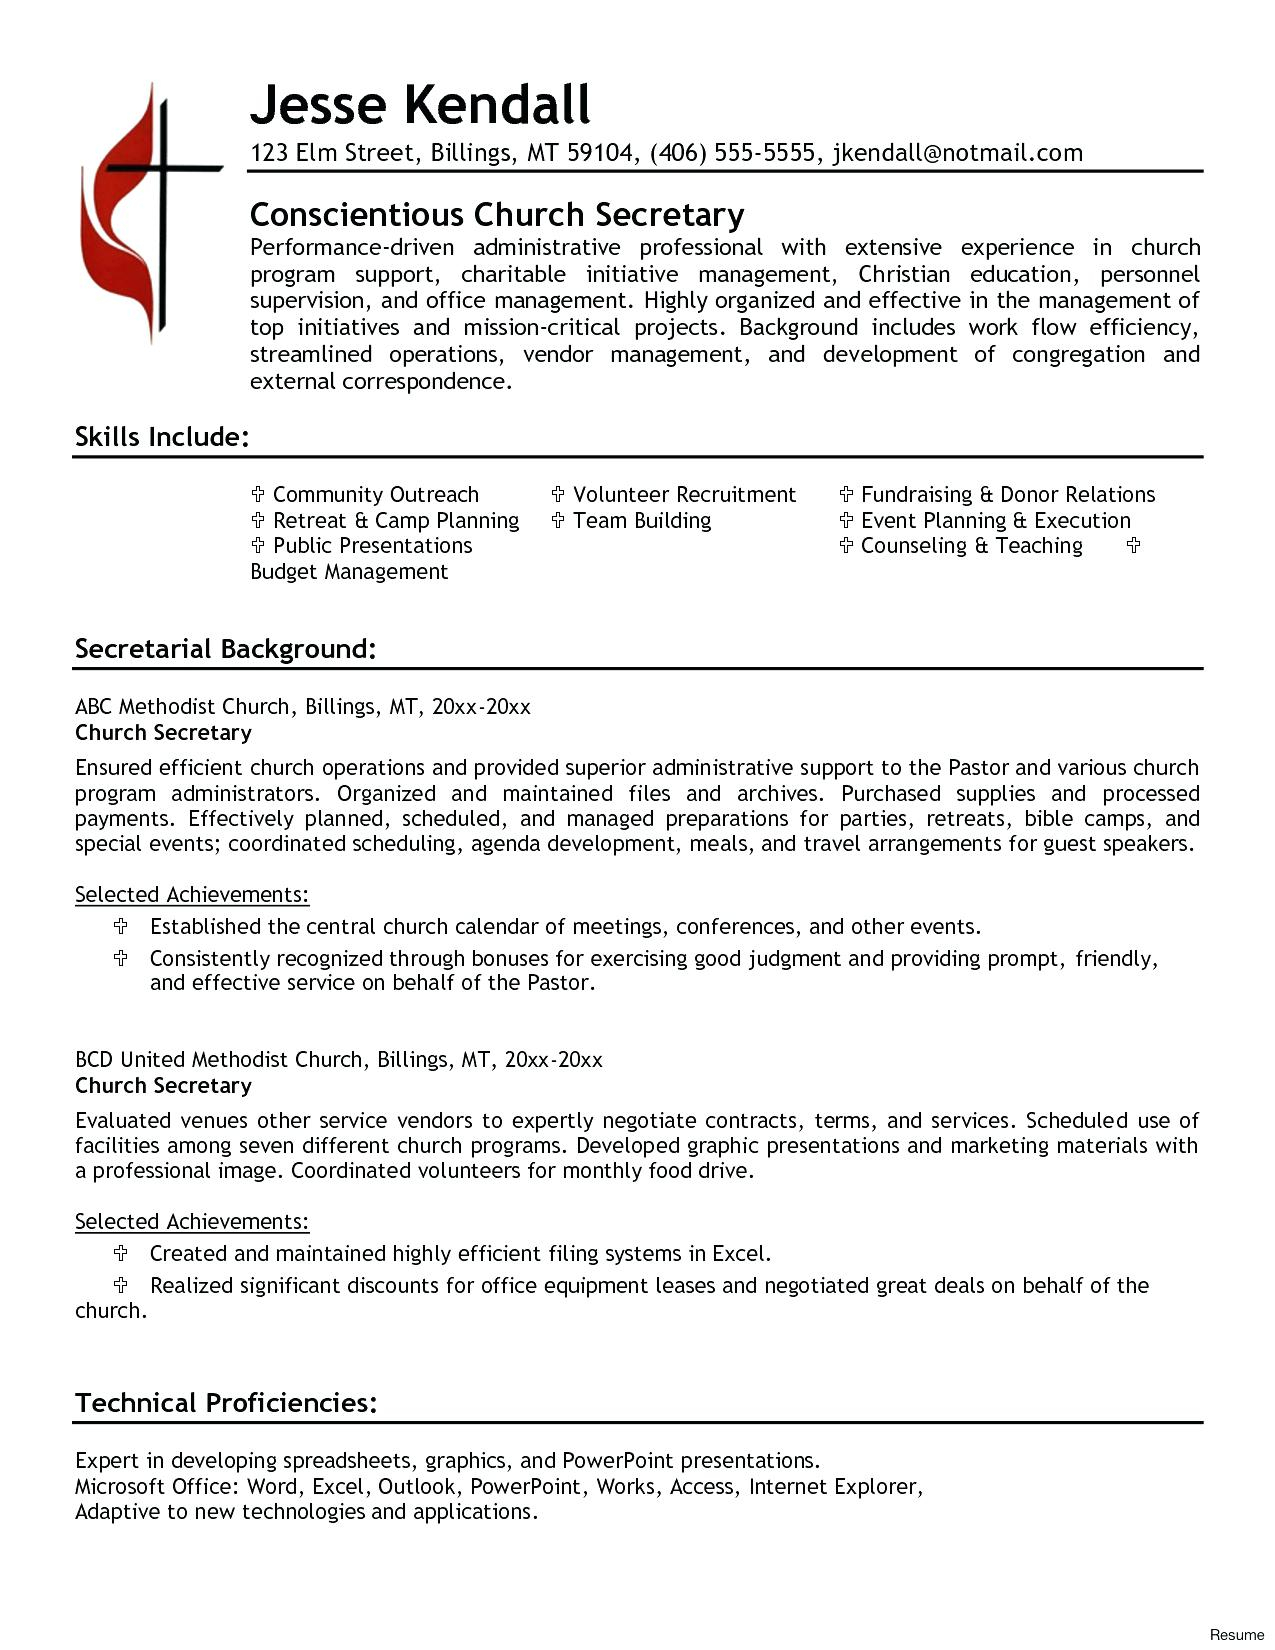 Best Resume Format Best Resume Format For Experienced Finance Standard Experience Mba 5